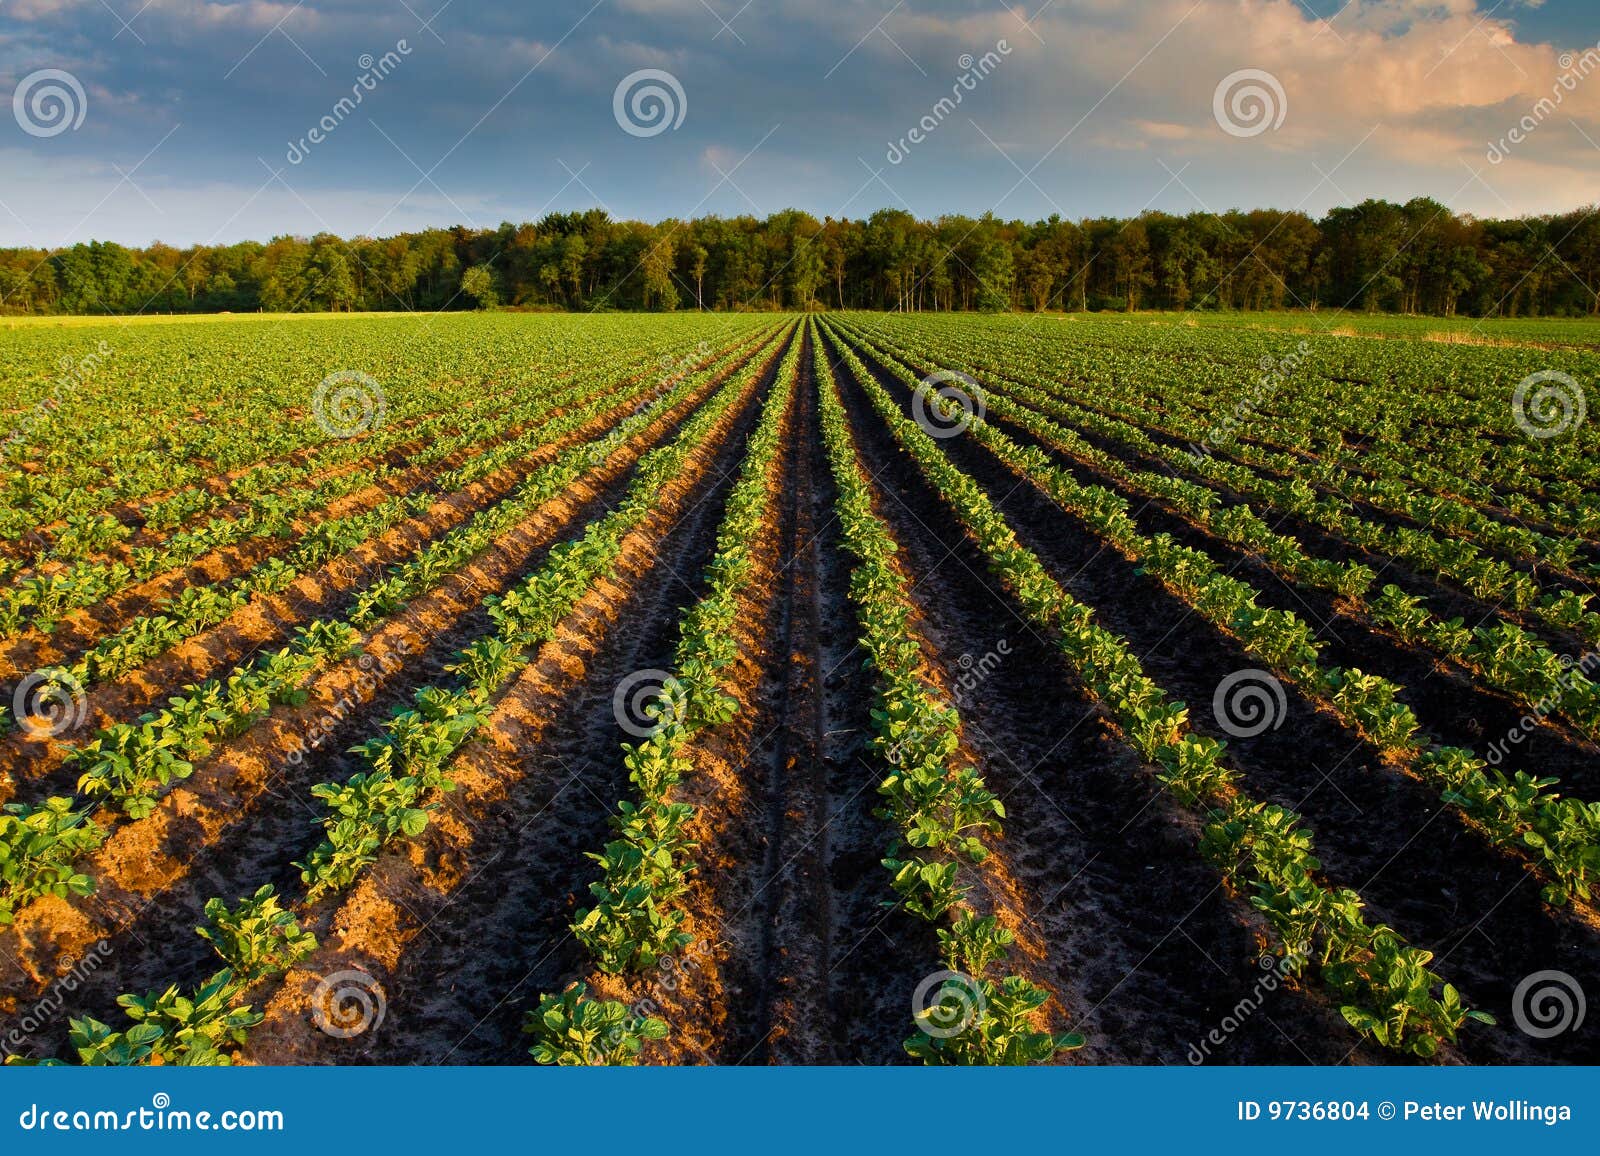 countryside with potato field